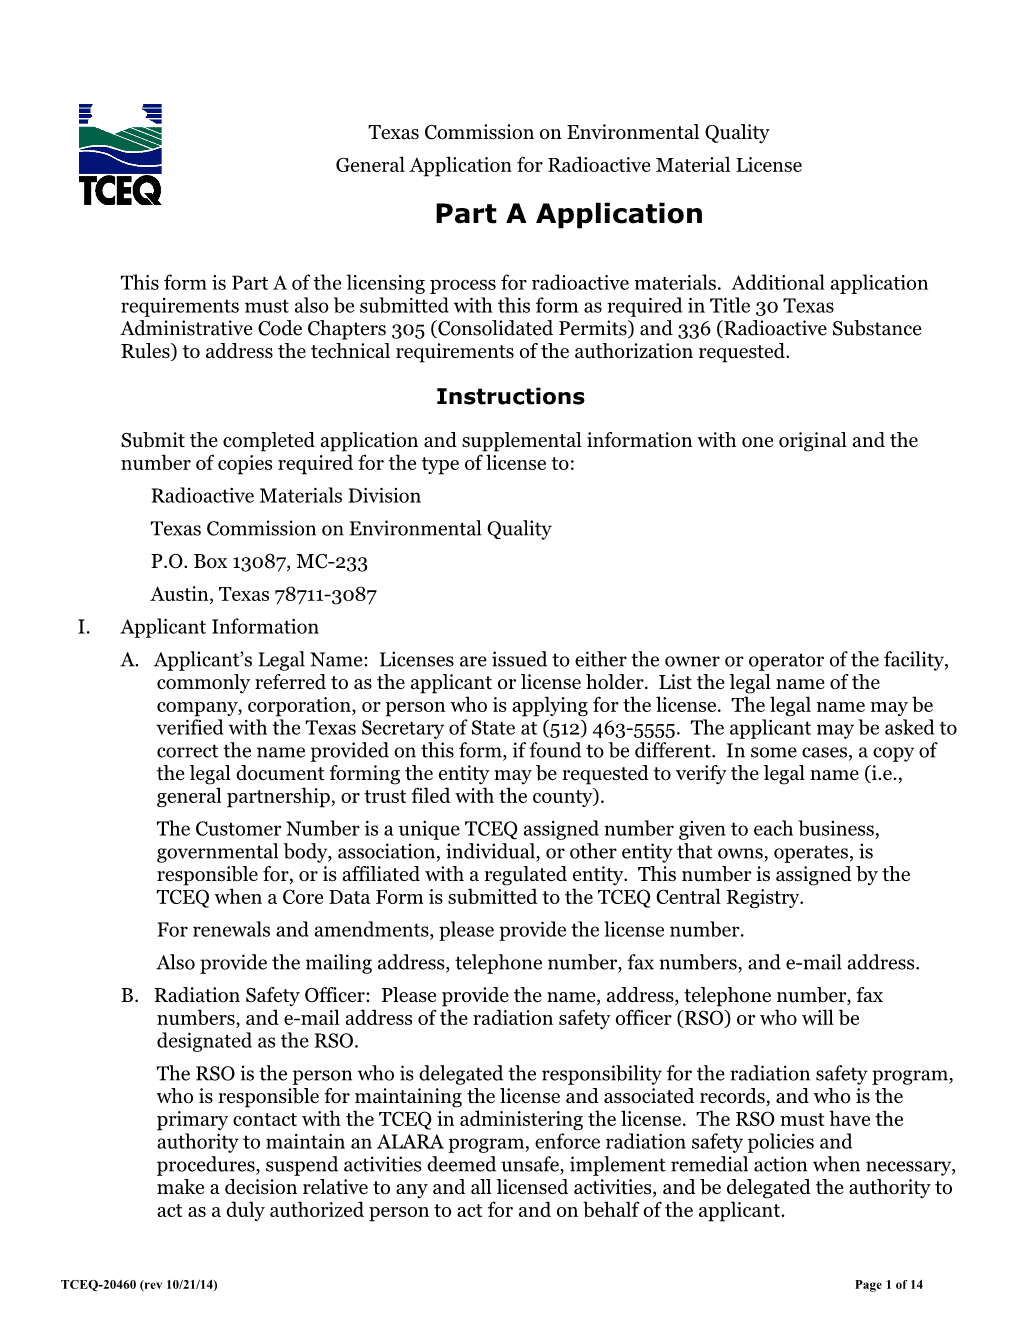 General Application for Radioactive Material License